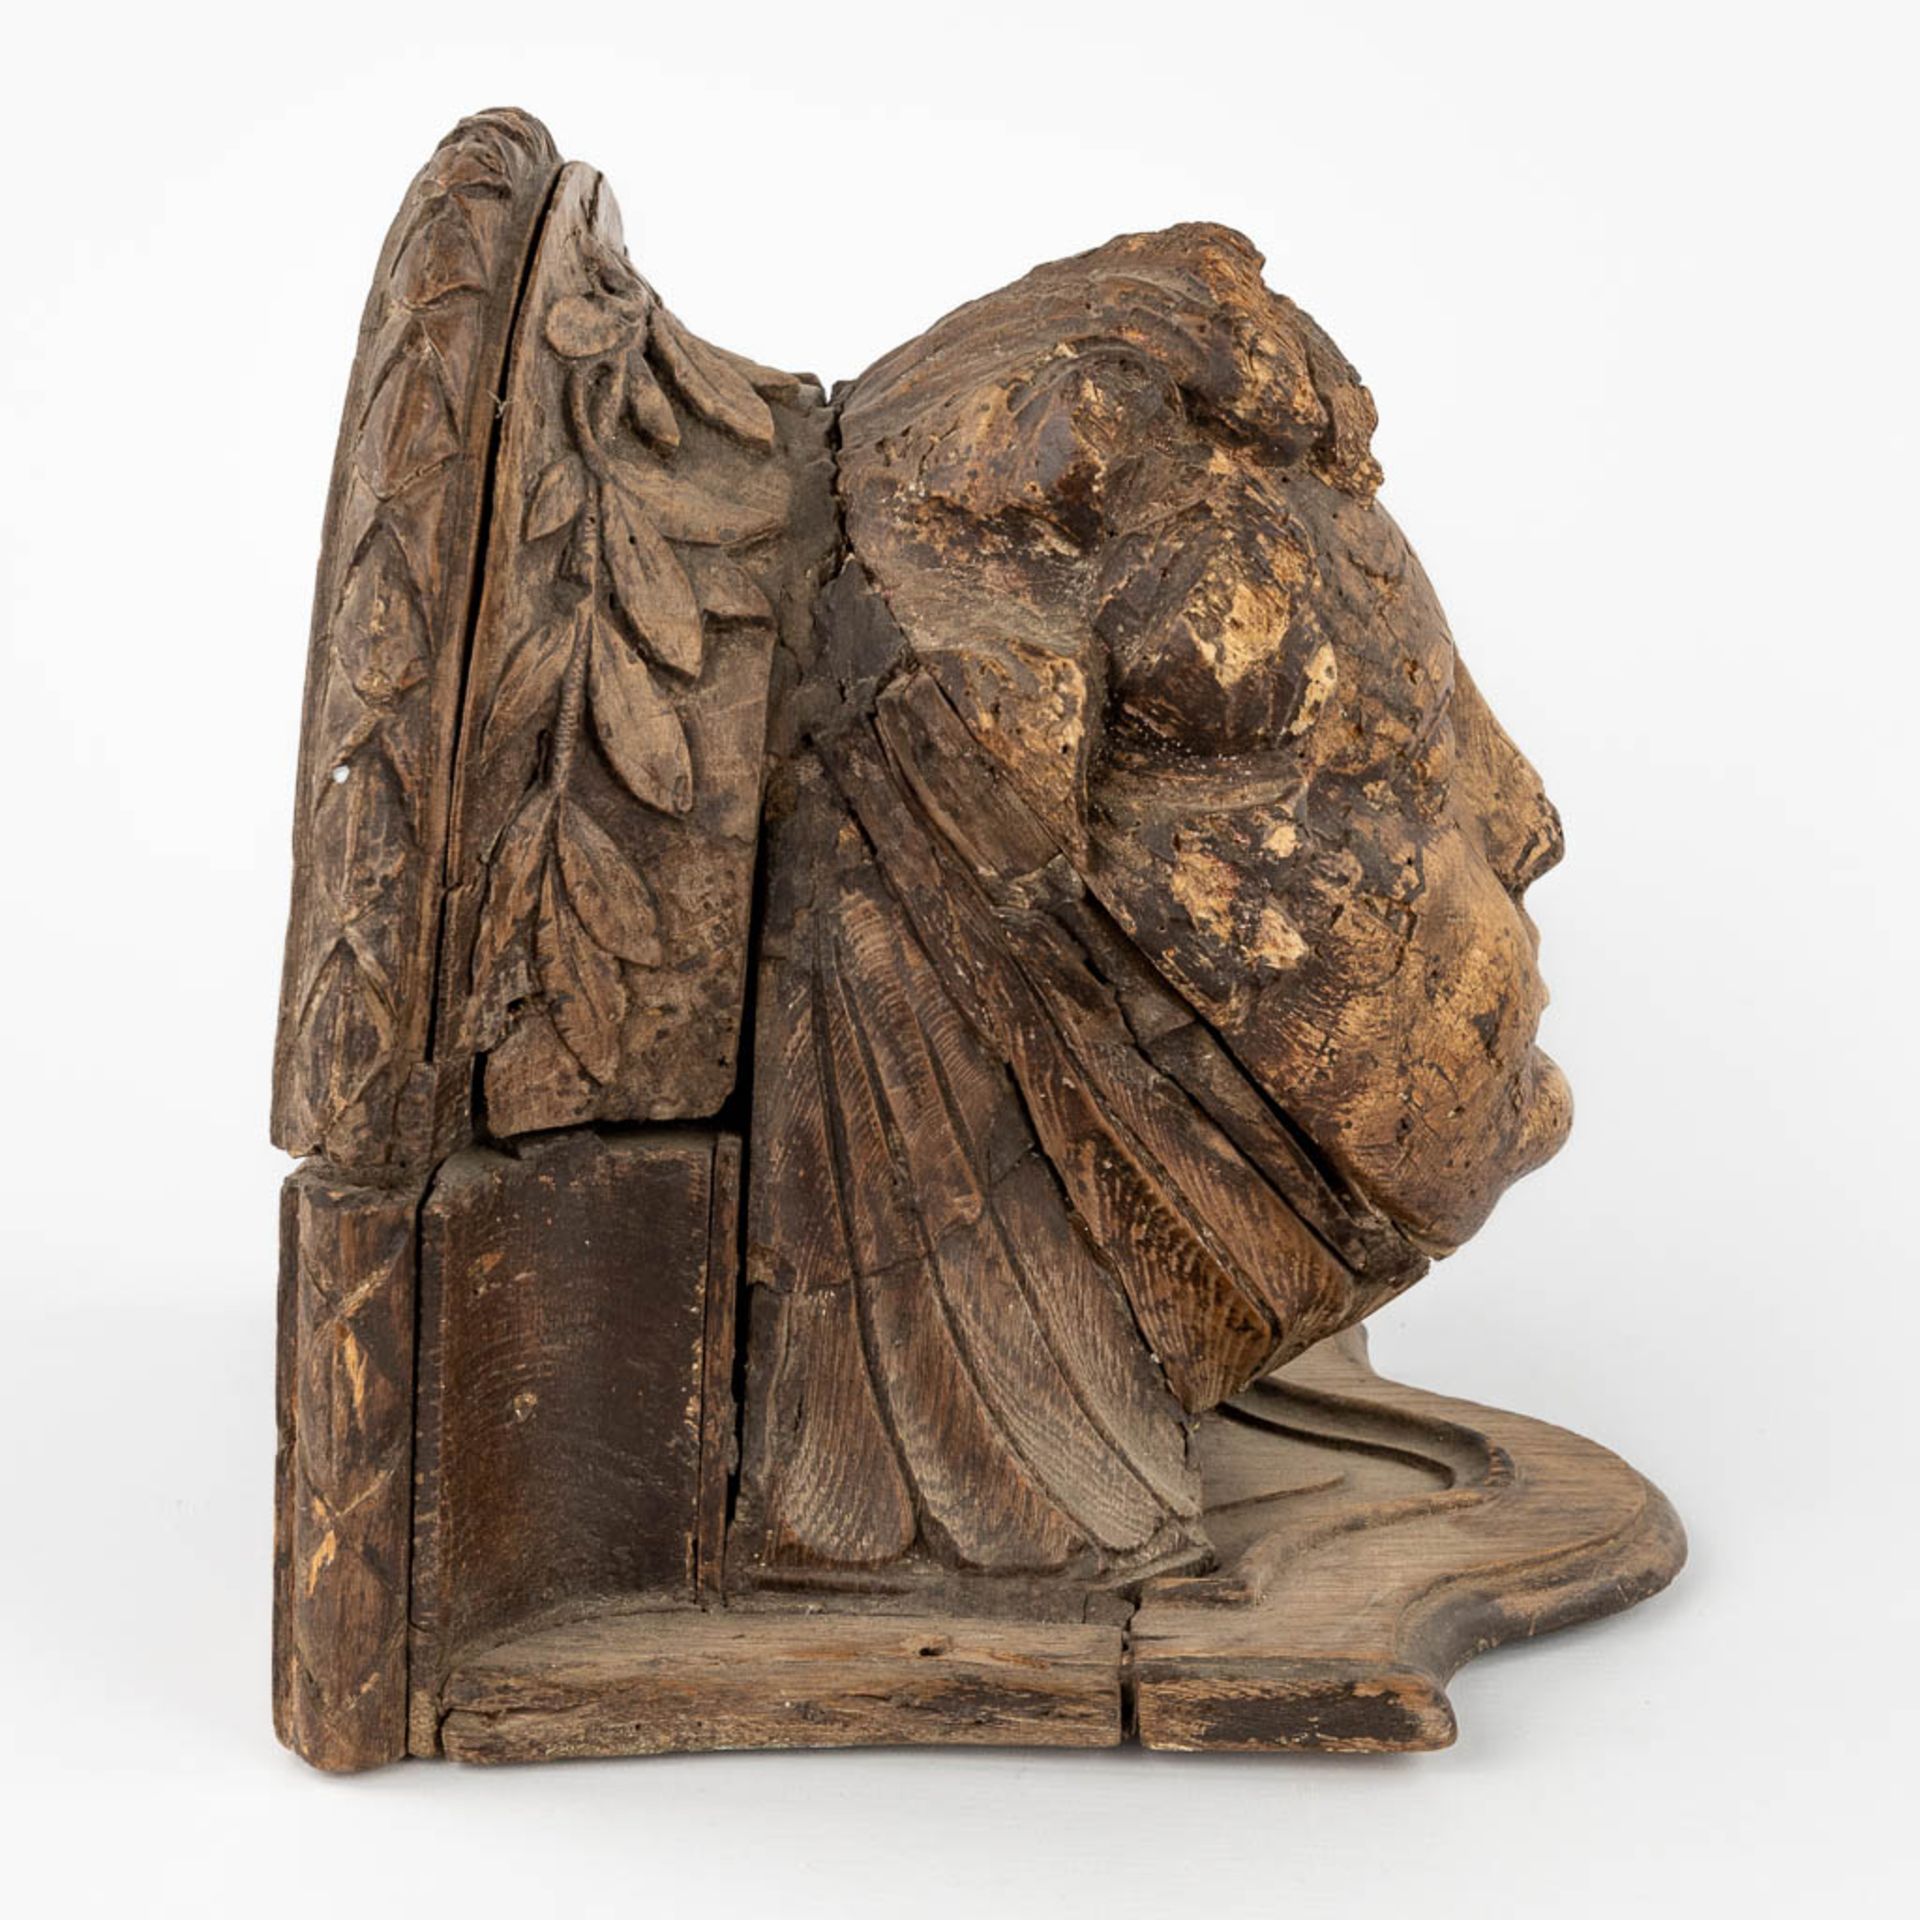 An antique, wood-sculptured corbel with an angel figurine. Oak, 17thC. (L:30 x W:28 x H:27 cm) - Image 6 of 11